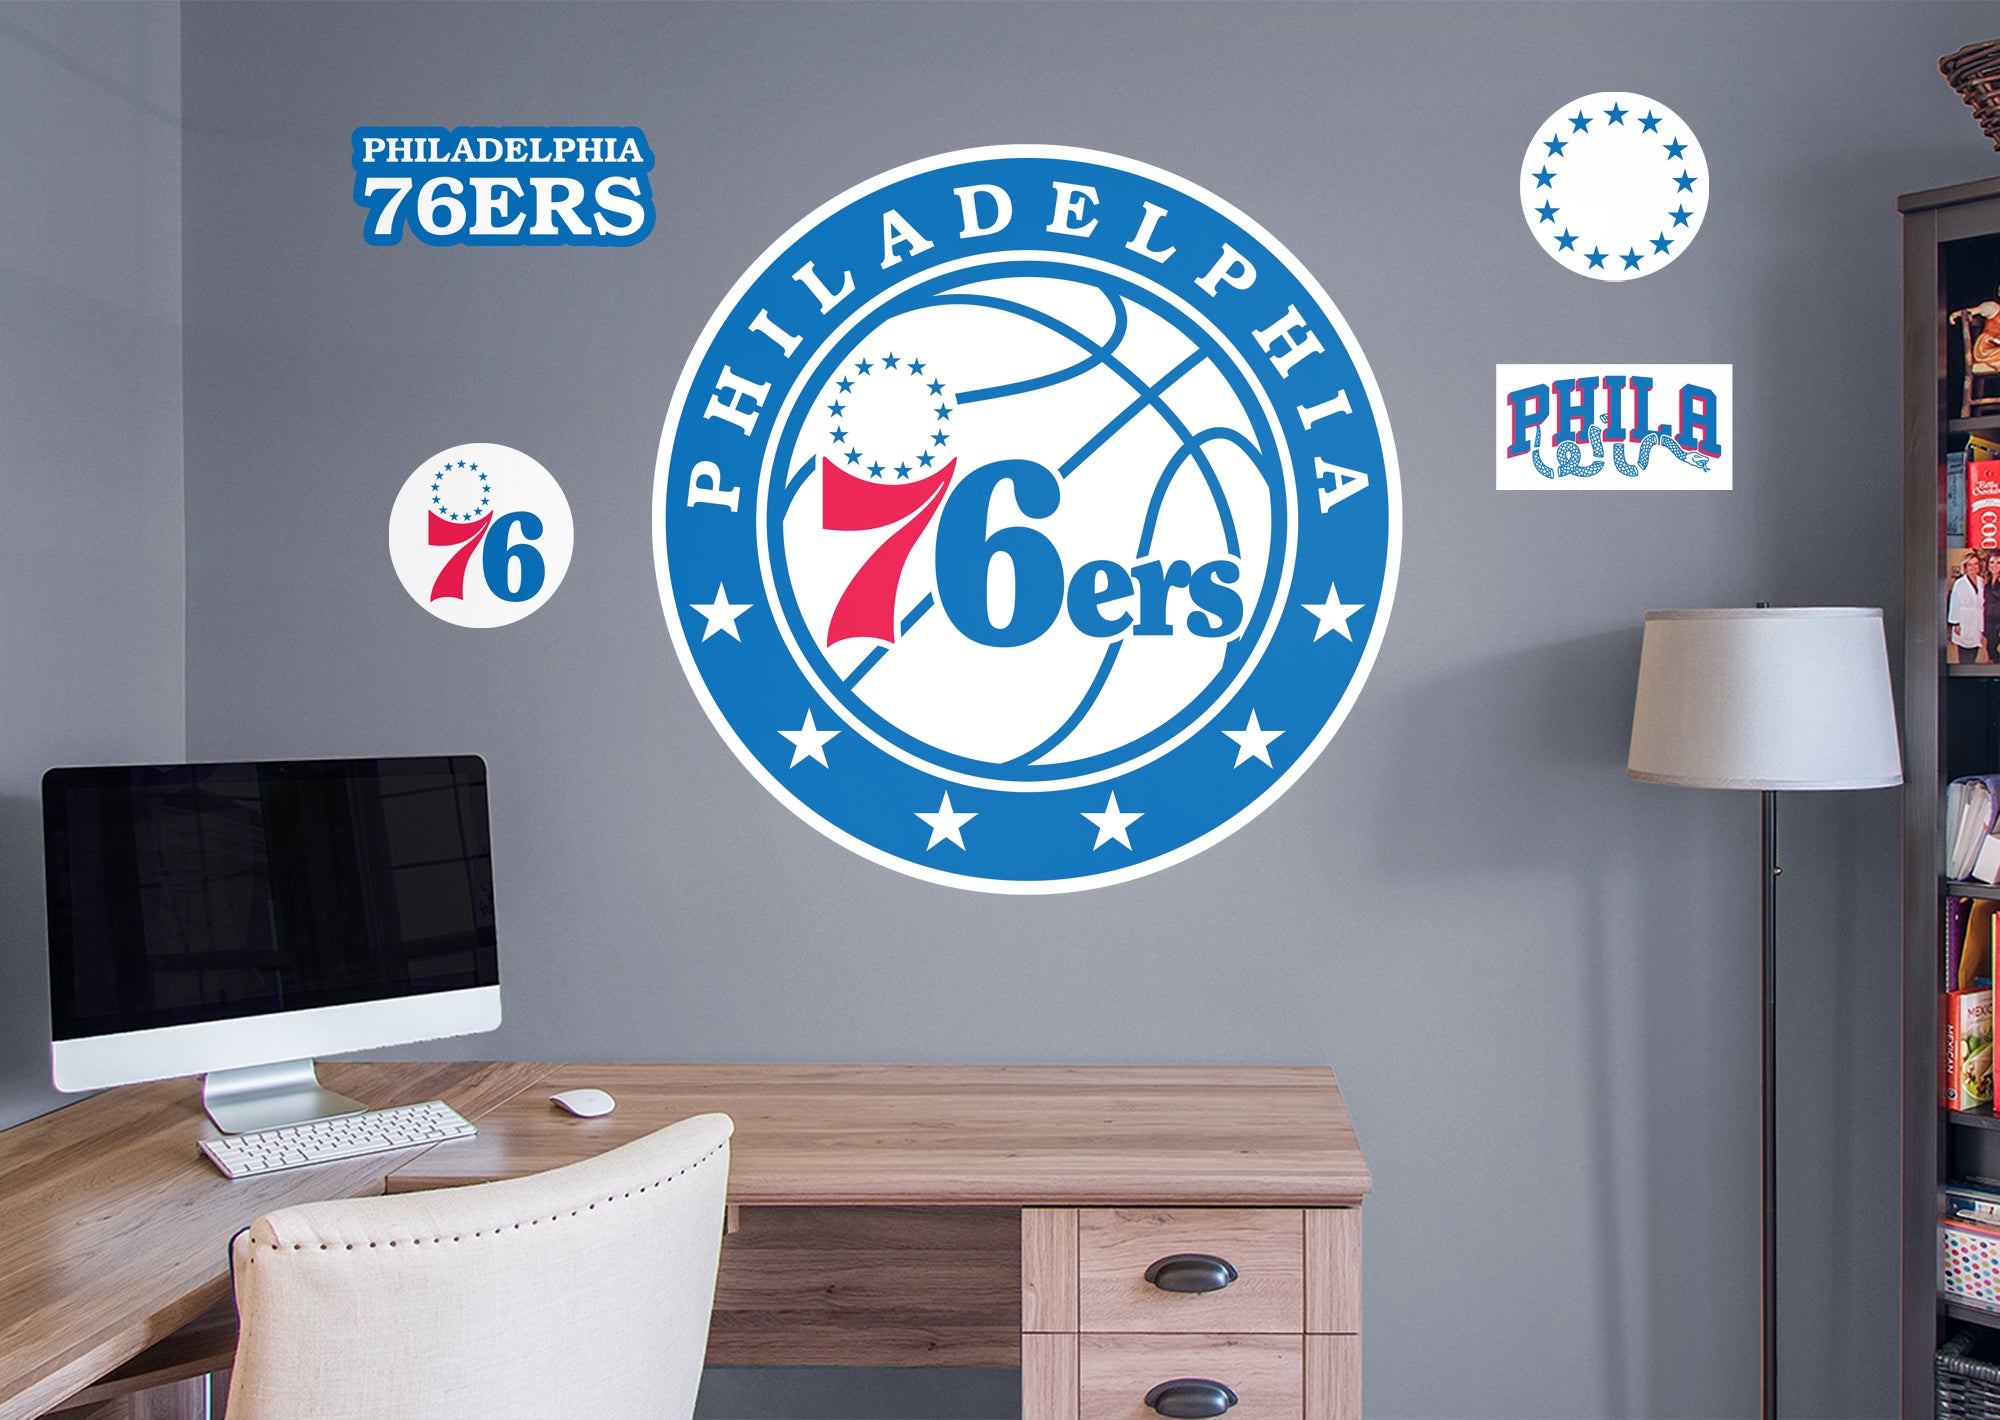 Philadelphia 76ers 2021 Logo - Officially Licensed NBA Removable Wall Decal Giant Logo + 4 Decals (38"W x 38"H) by Fathead | Vin